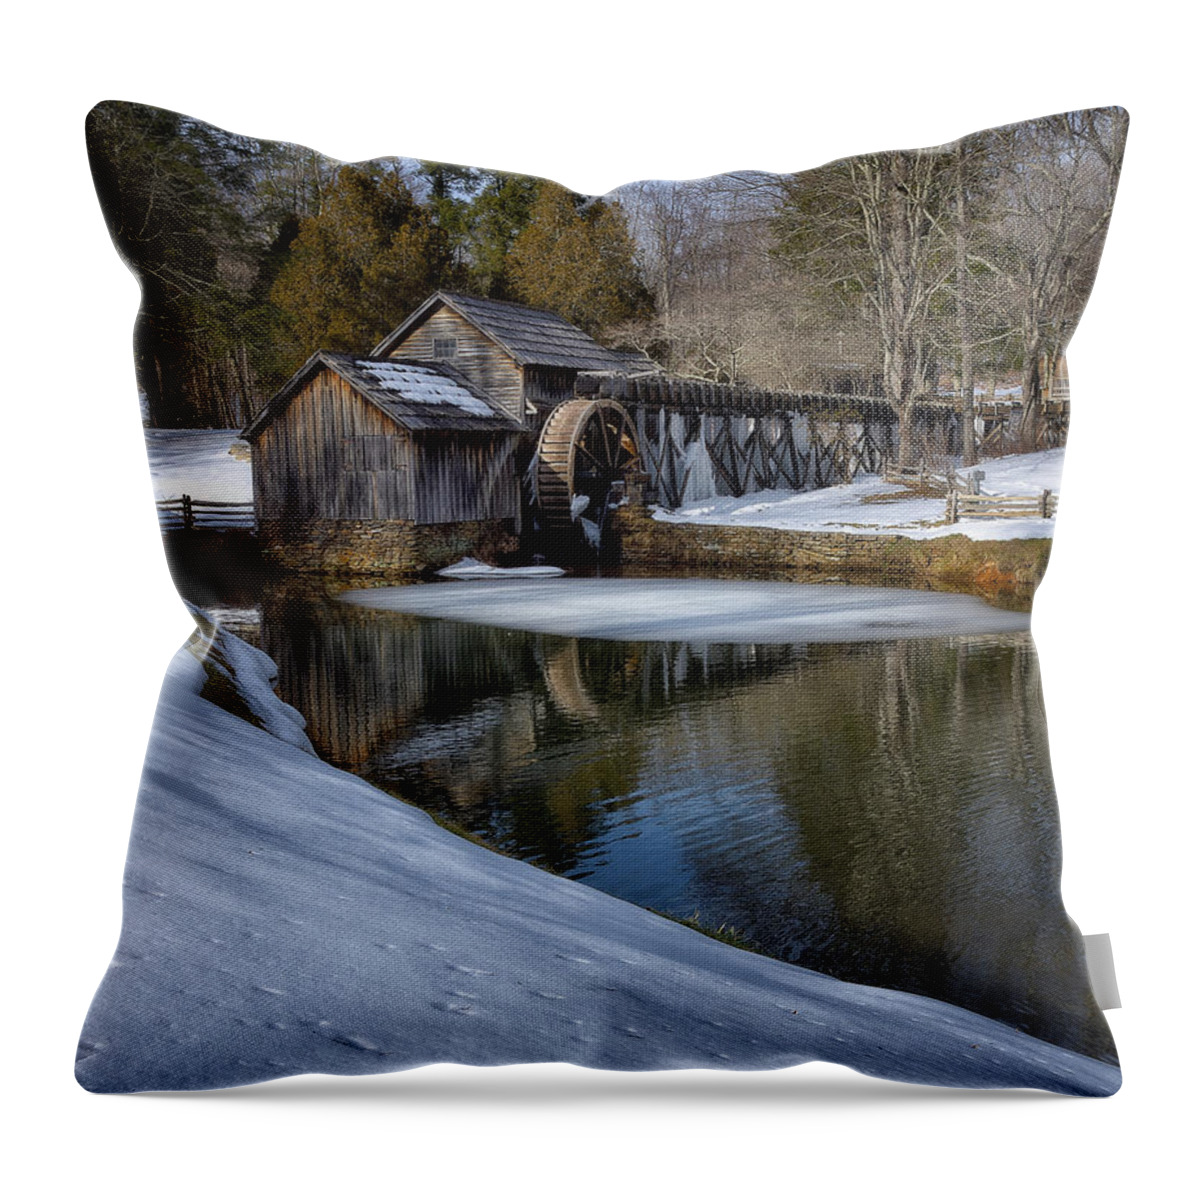 Mabry Mill Mabry Water Wheel Blue Ridge Parkway Virginia Blue Ridge Parkway Blue Ridge Fall Lake Pond Water Mill Grist Mill Water Wheel Blue Ridge Landscape Mabry Mill Landscape Mountains Wildlife Trees Color Leaves Turning Americana Scene River Stream Creek Reflection Wood Texture Grain Stone Flour Oak Beauty Serenity Serene Peaceful Peace Roanoke Woolwine Hospital Art Snow Throw Pillow featuring the photograph Winter snow at Mabry Mill by Steve Hurt